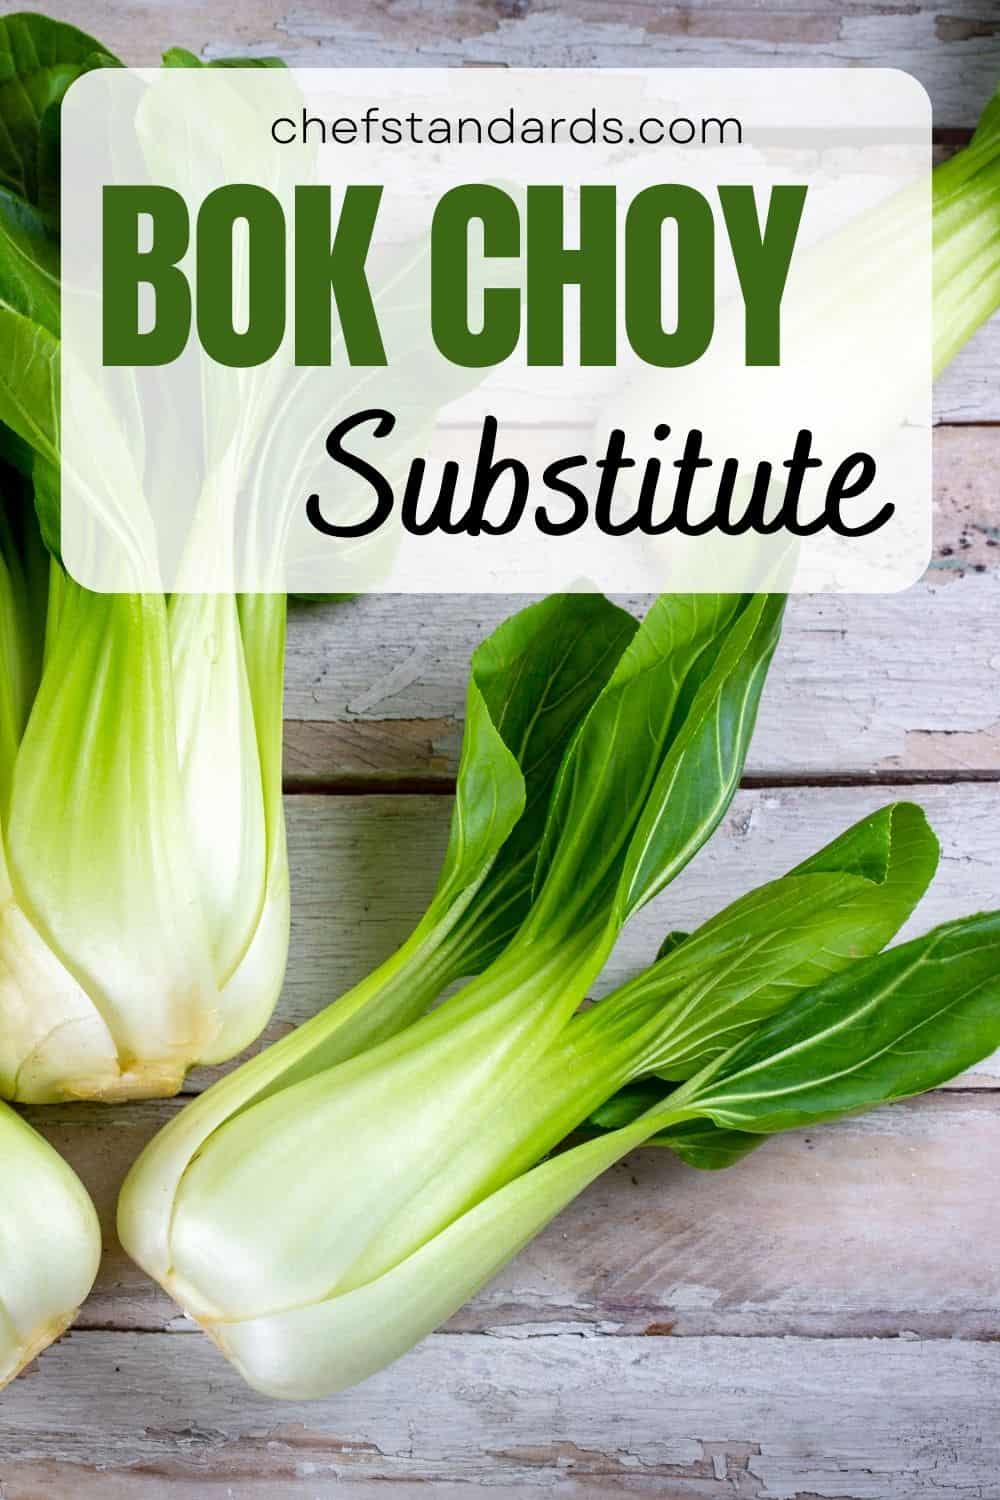 8 Great Foods To Substitute Bok Choy And Upgrade Your Dish